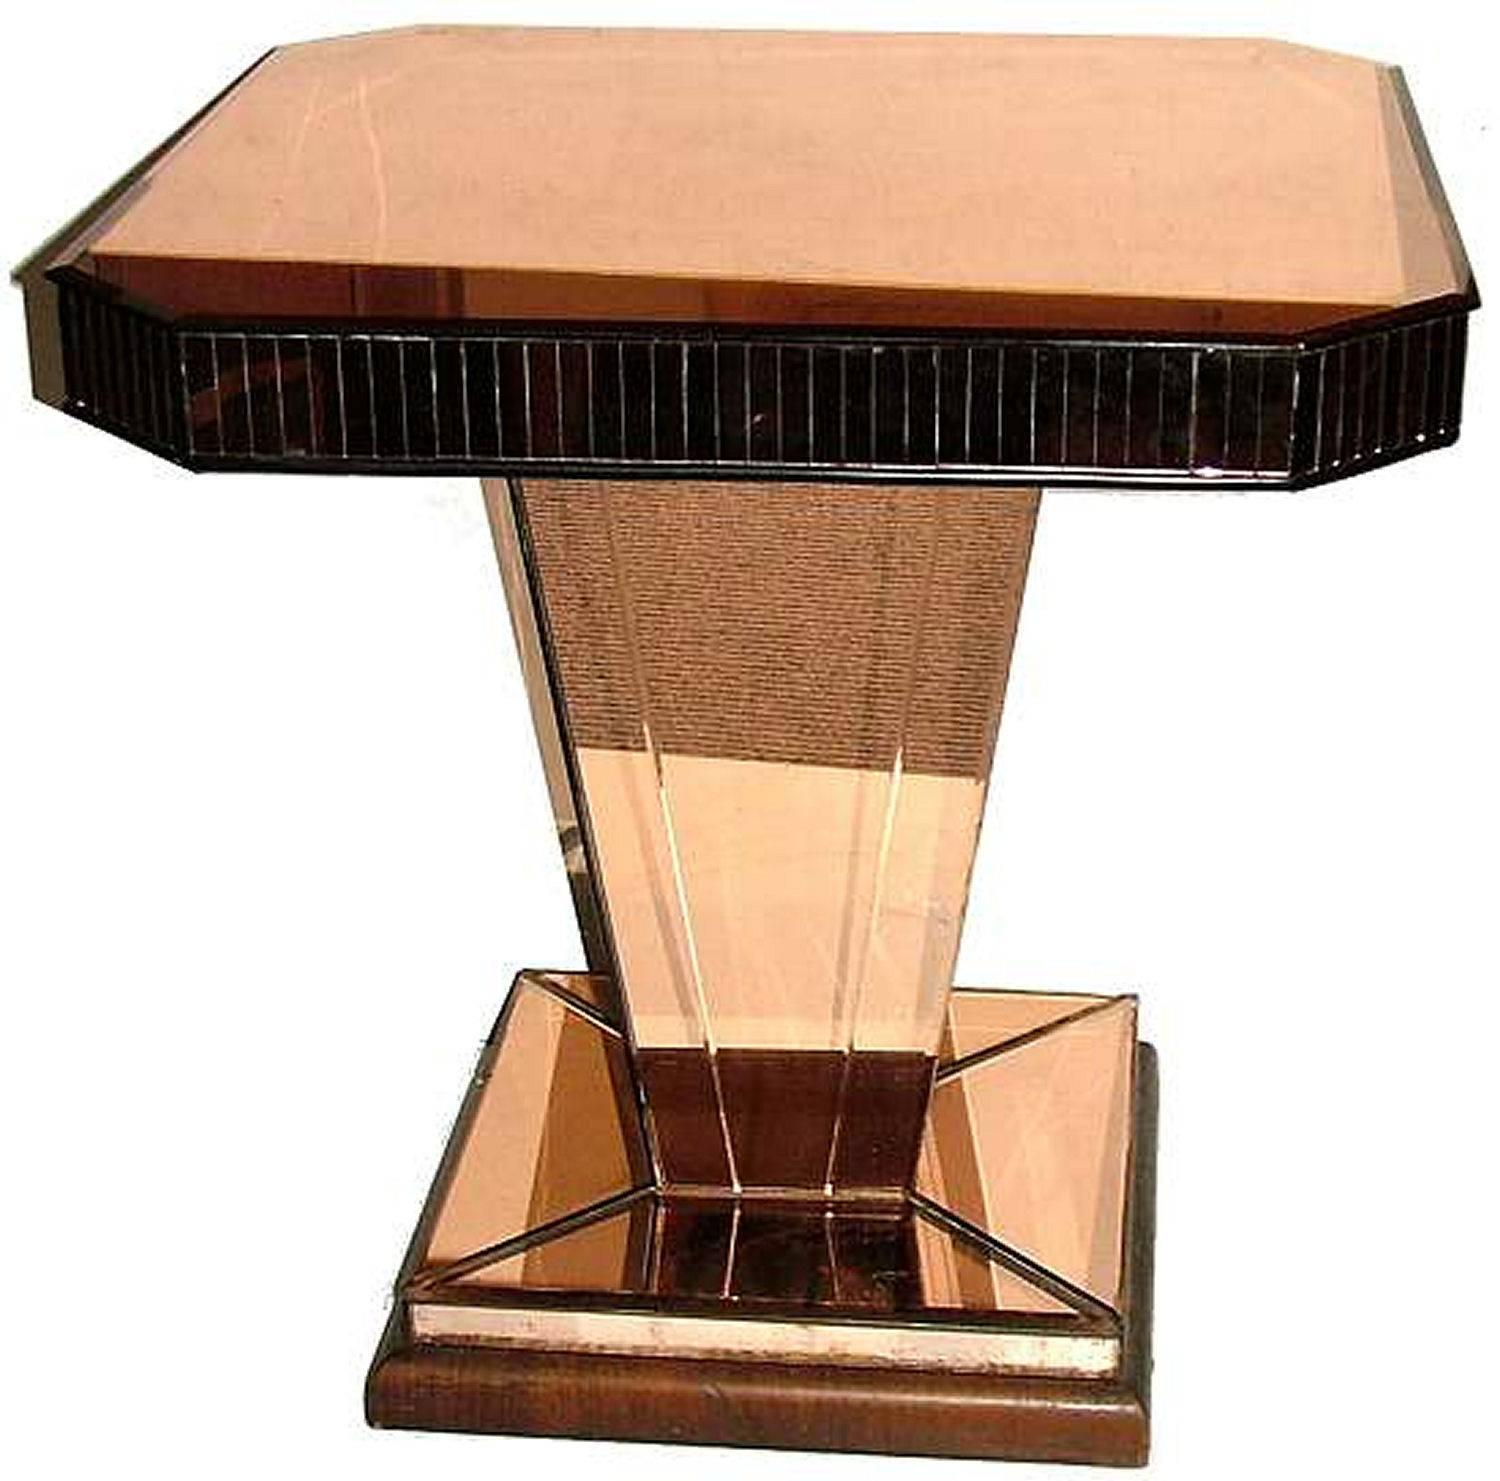 Absolutely stunning 1930s Art Deco all peach mirror glass centre table. This fabulous, glamorous table features thick cut bevelled peach coloured glass to all edges all resting on a walnut feather band plinth. It has a fabulous conical shaped stem